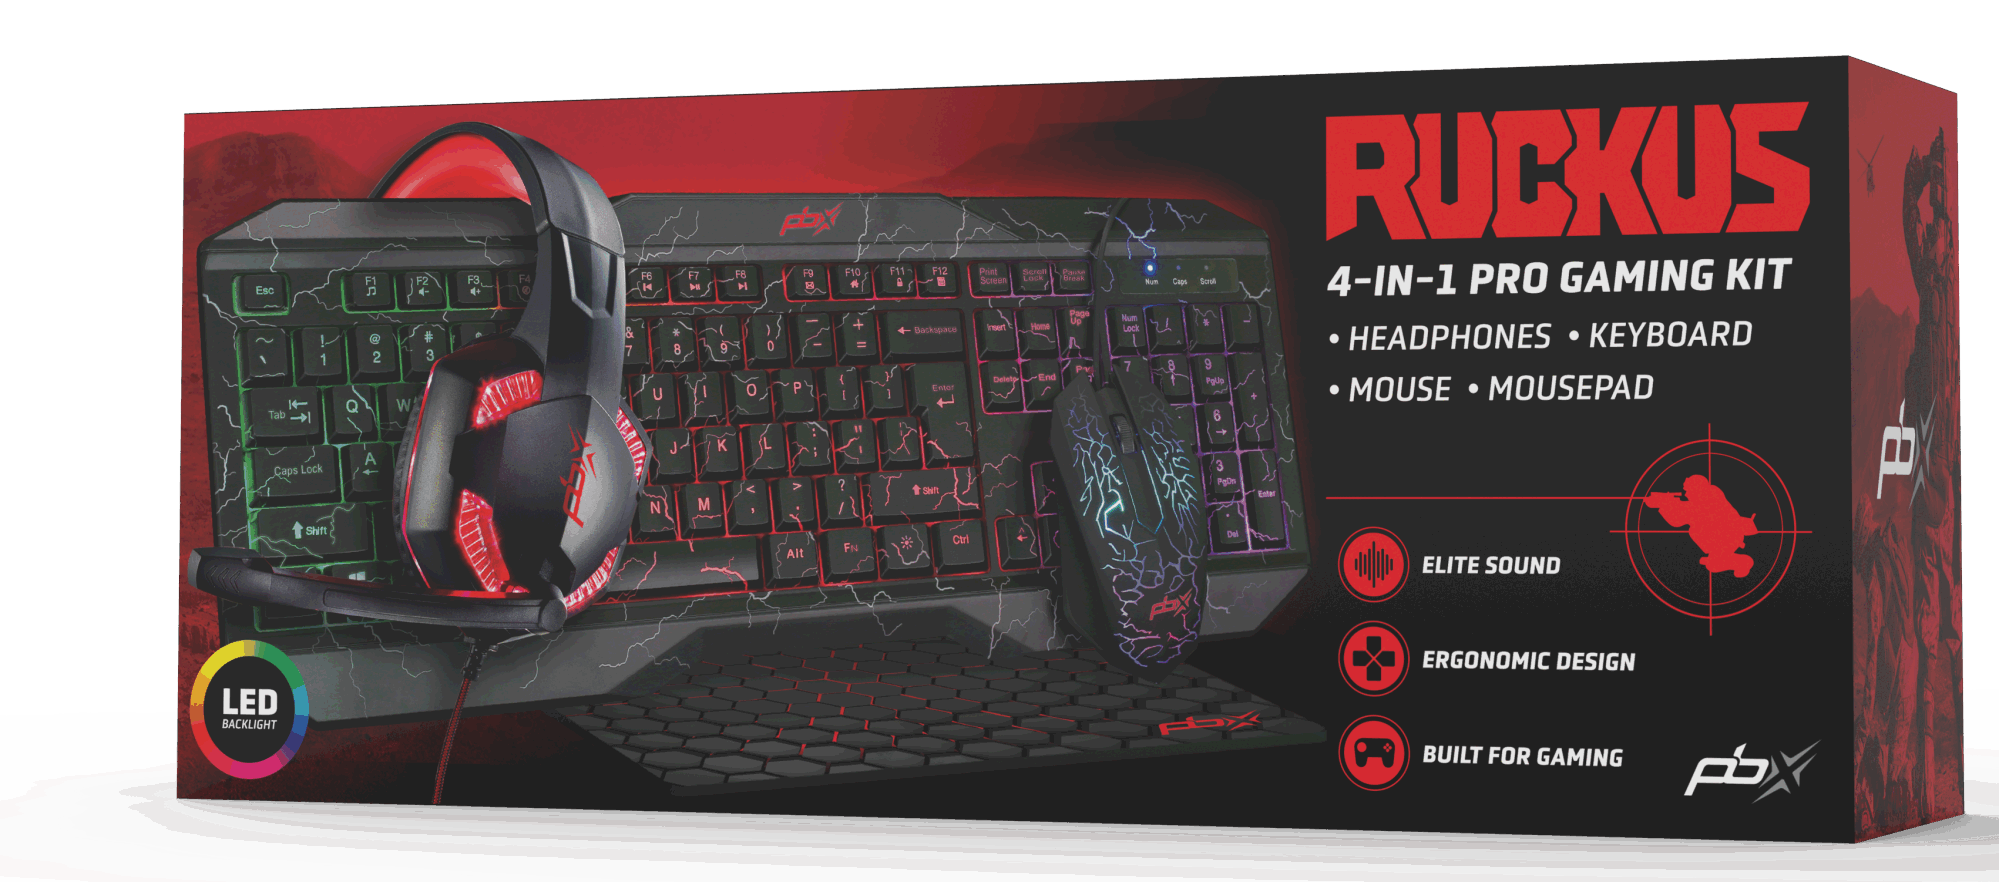 Gaming keyboard with multicolored backlighting and a headset with red accents placed on top, both on a 4-IN-1 Pro Gaming Kit Headphones Keyboard Mouse - Mousepad, against a dark background.